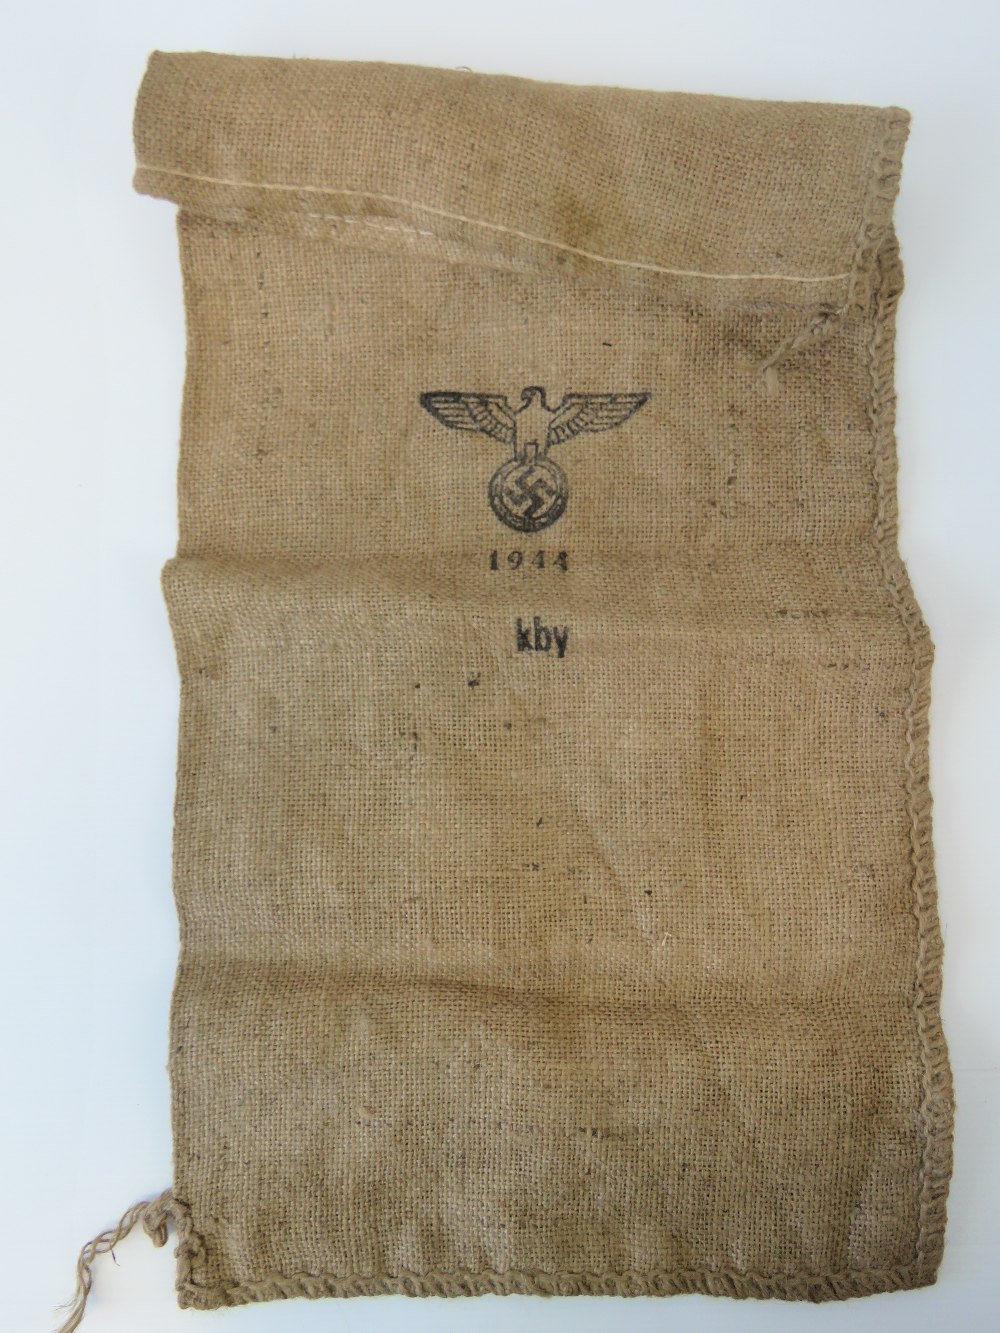 A WWII German hessian burlap sack with eagle swastika and dated 1944, 62cm x 30cm.